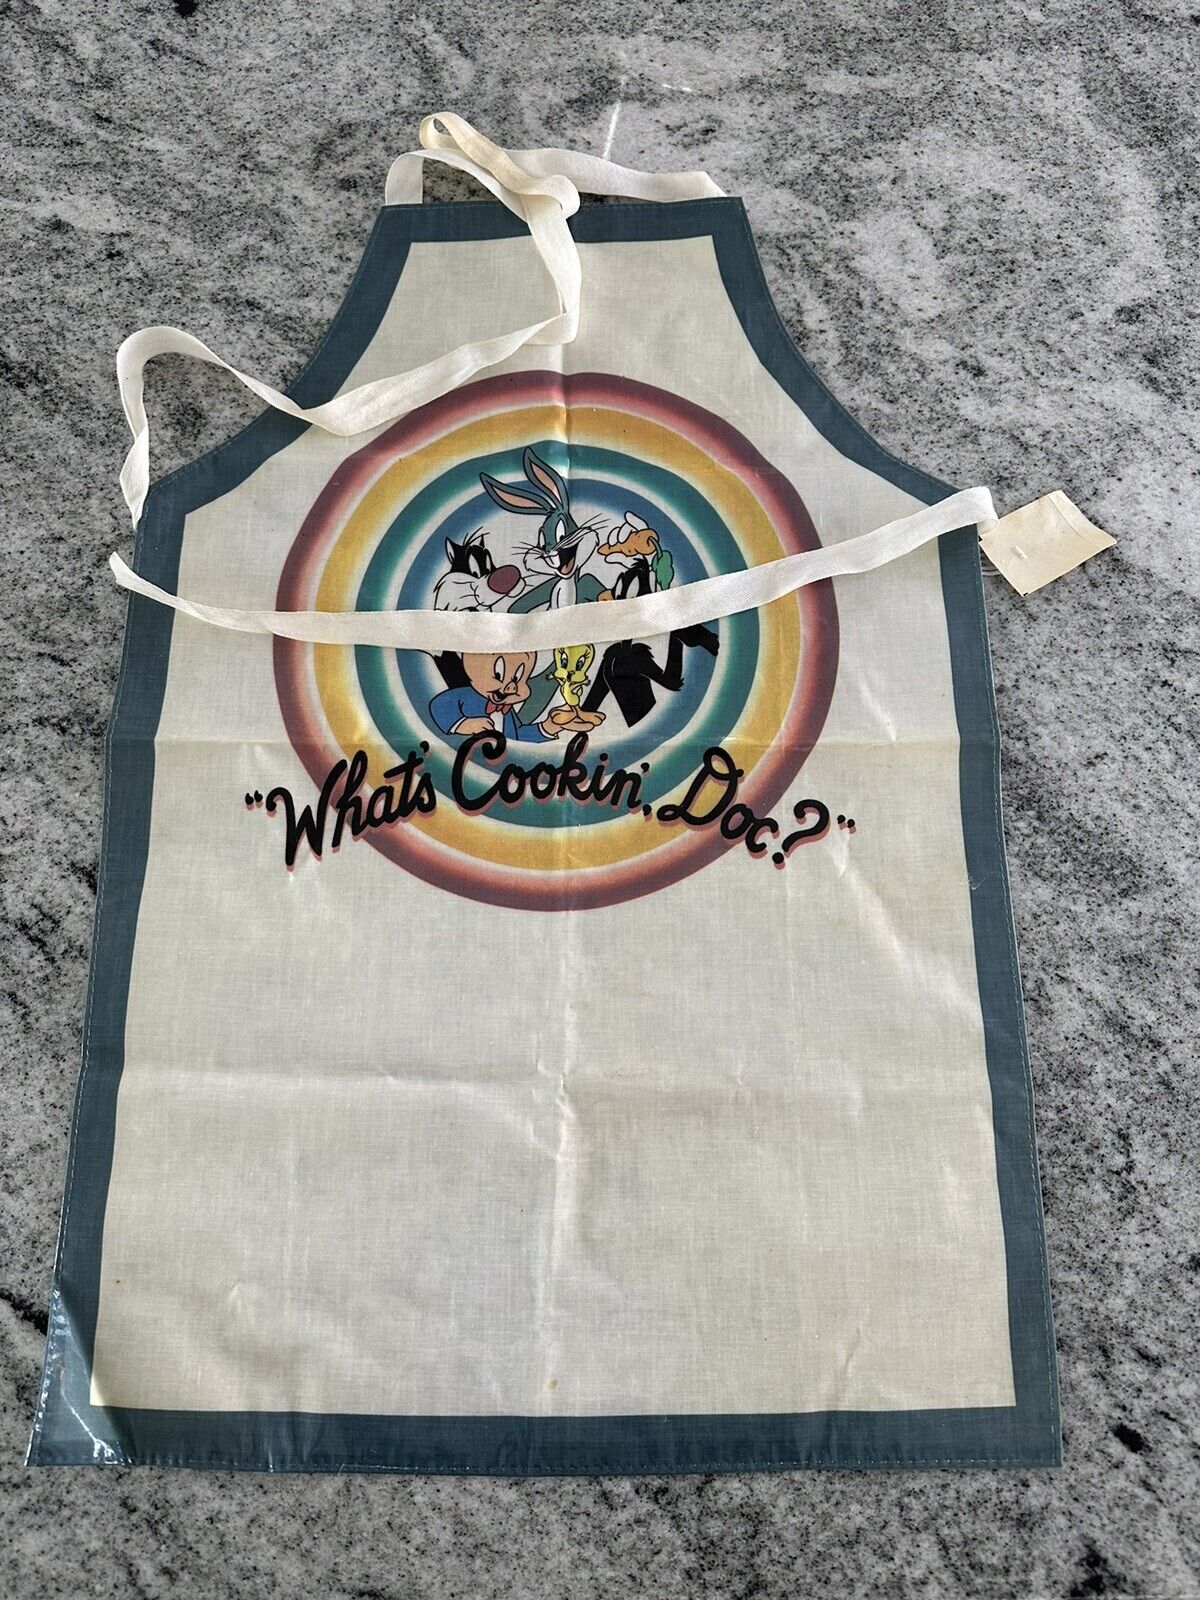 Looney Toons 1994 Apron W Org Tag Still Attached Bugs And Friends ￼￼￼￼￼￼￼￼￼￼￼